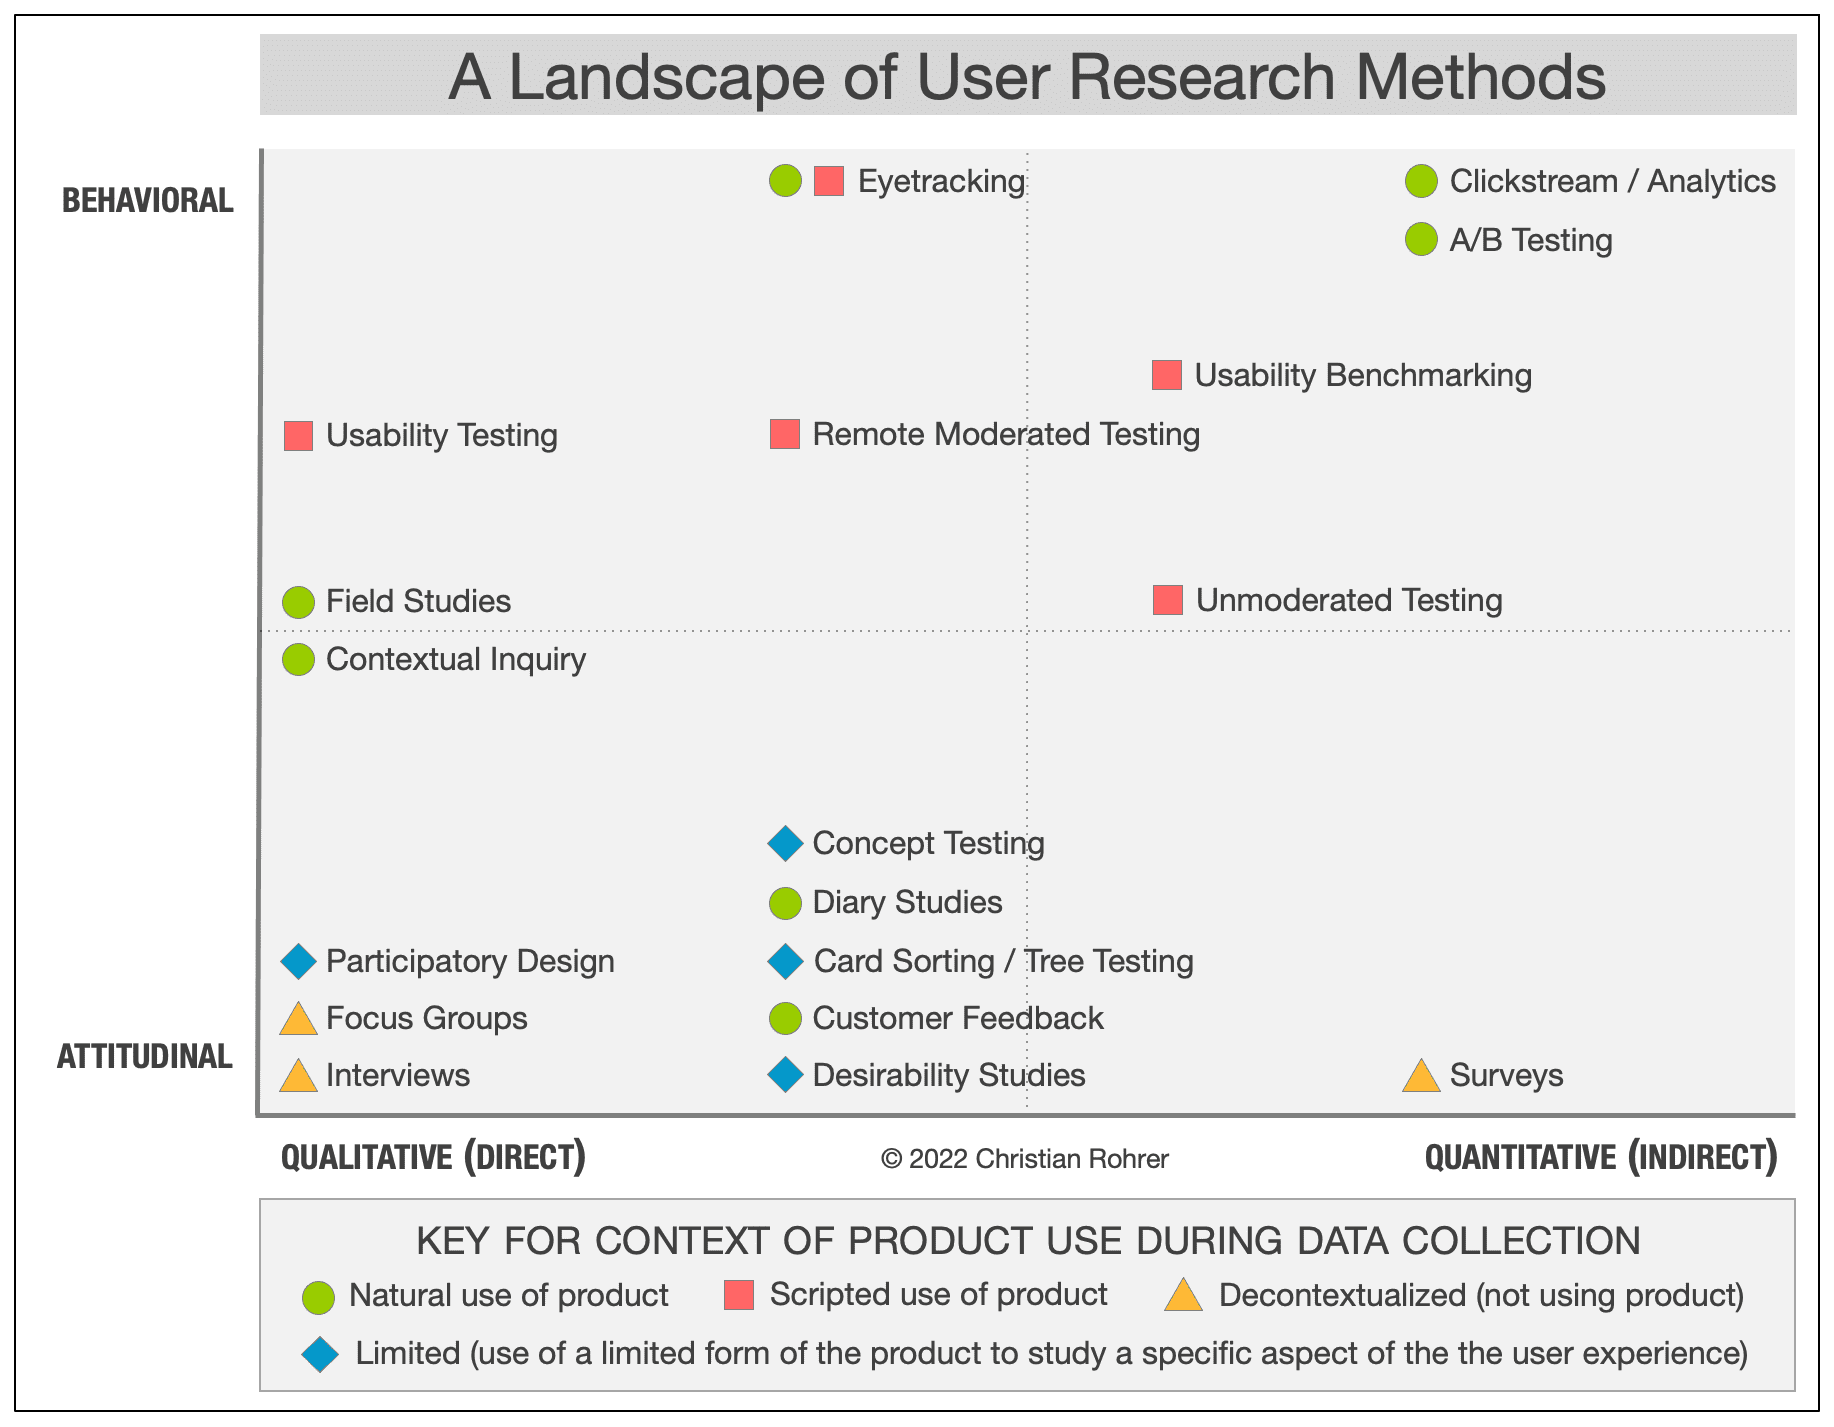 A landscape of user research methods